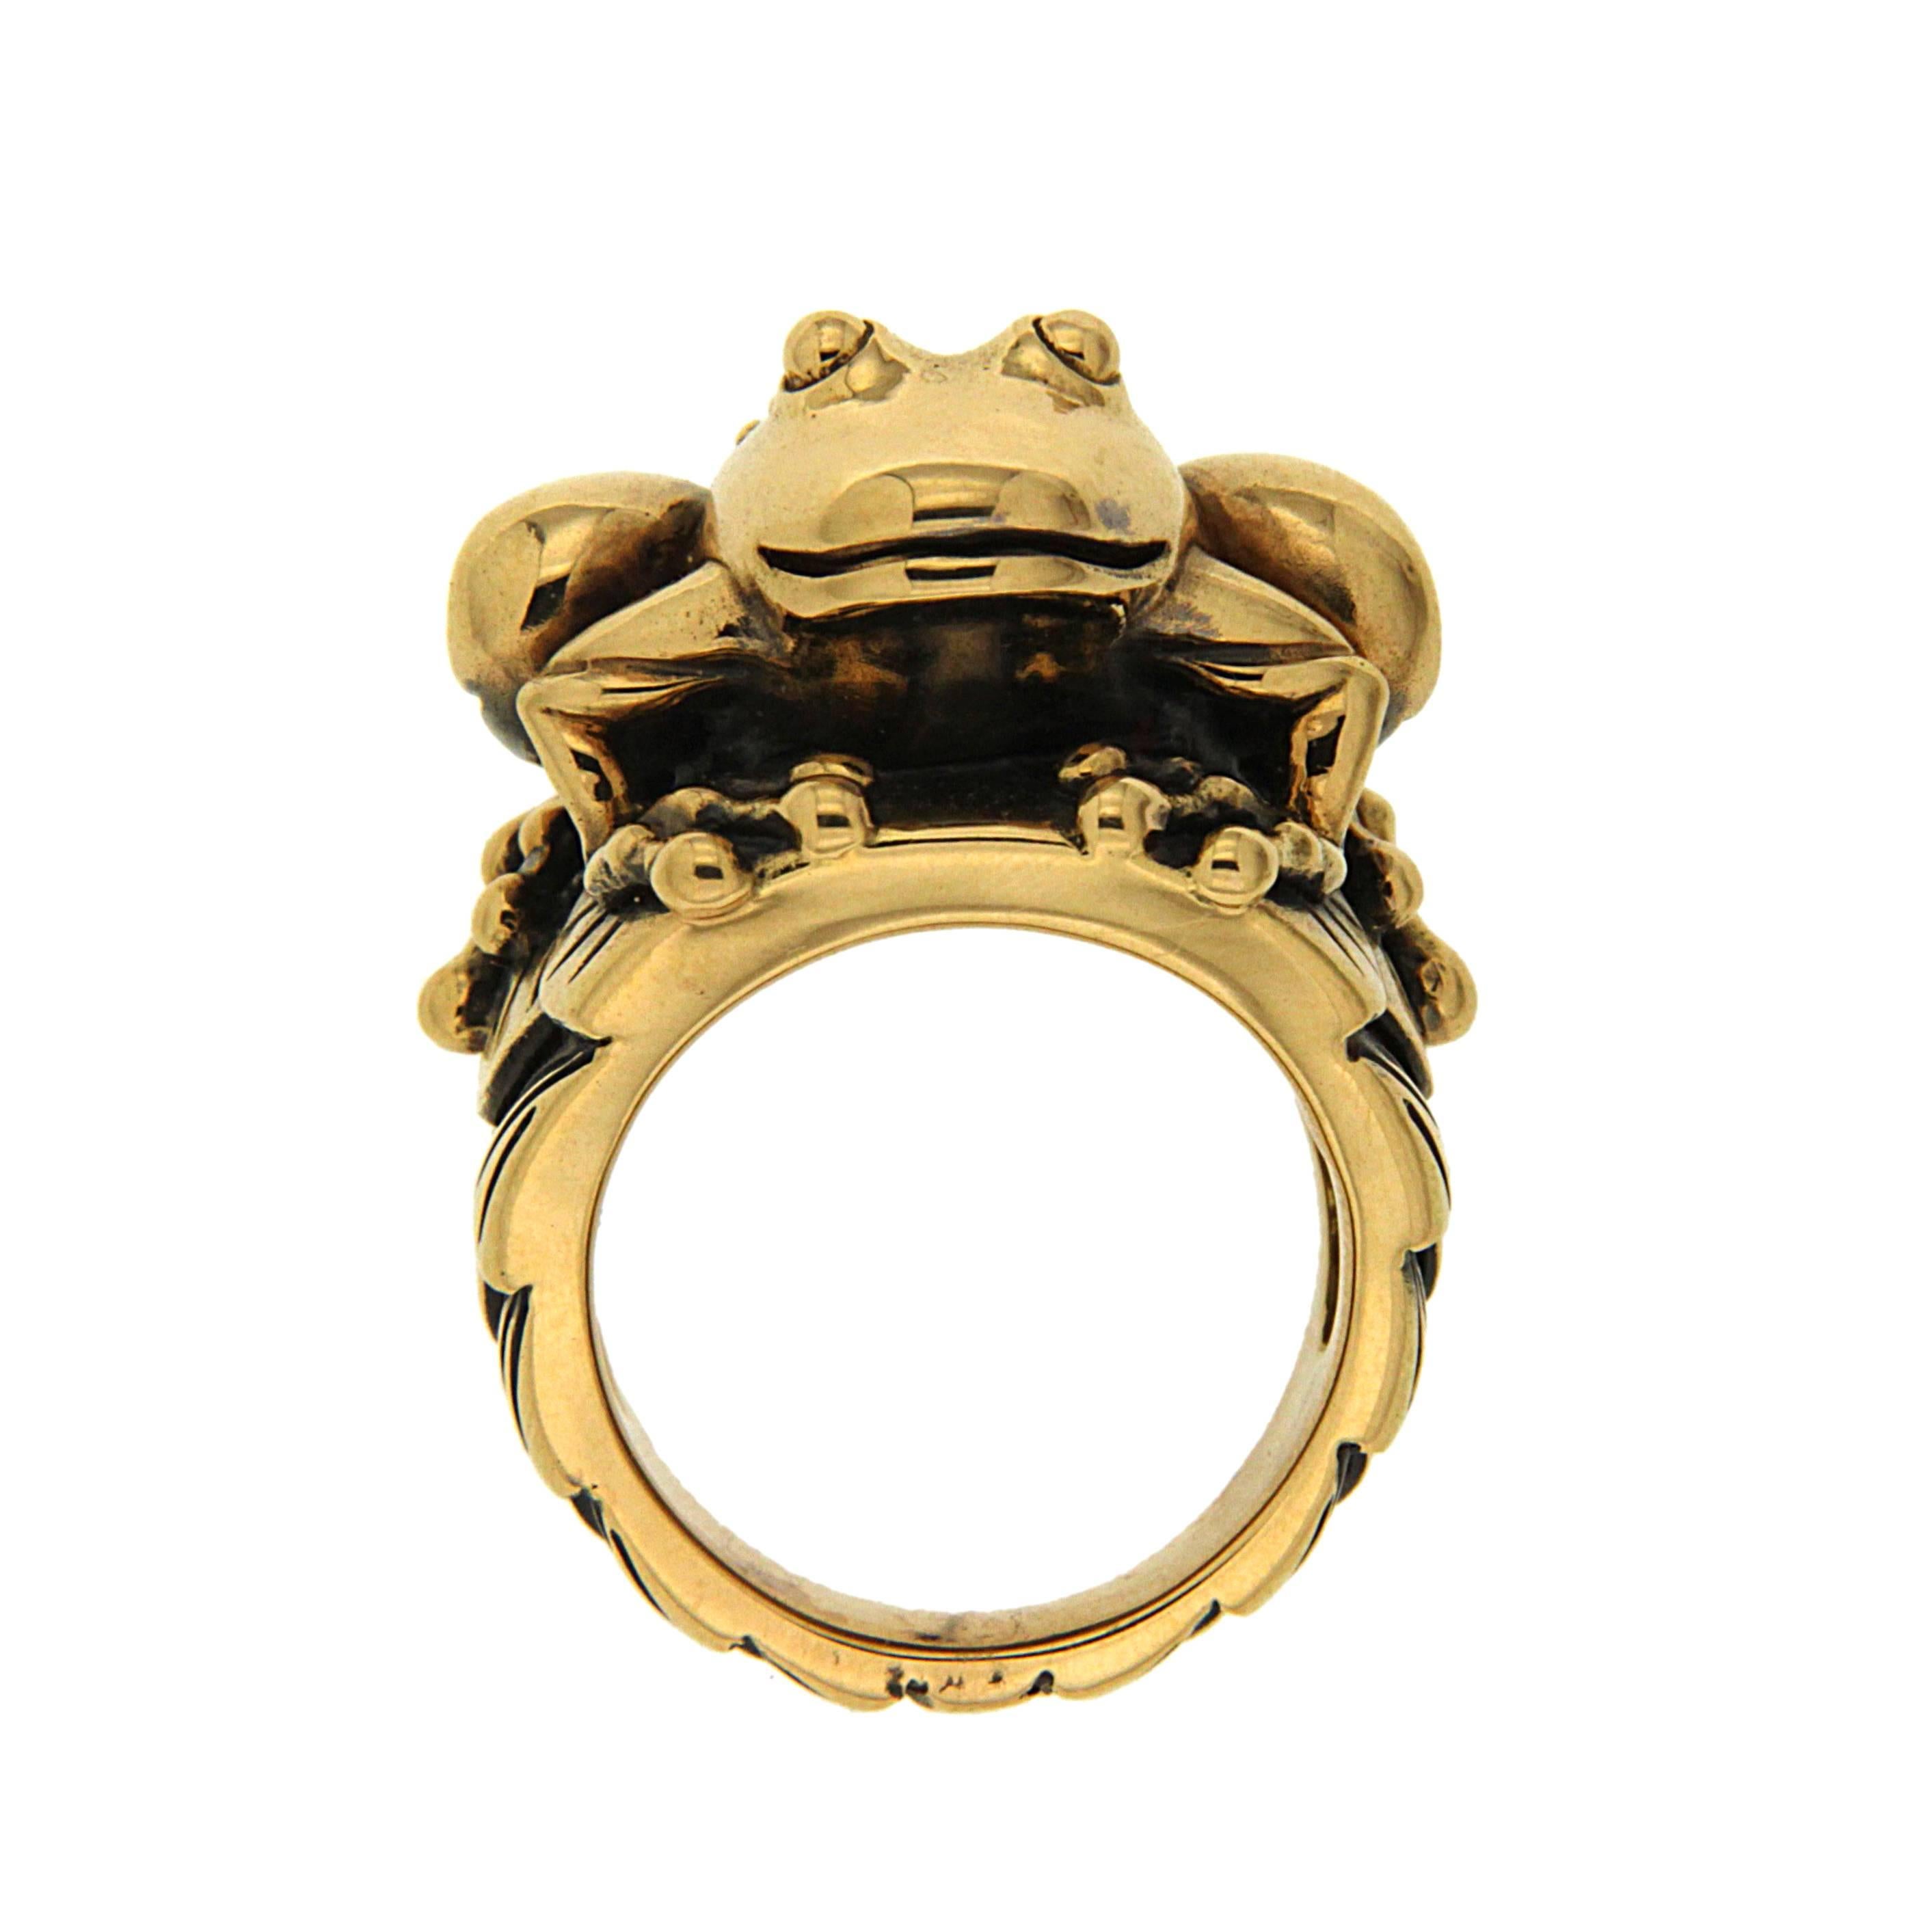 Inspired by the beauty of nature and animals, the lovely result is a three-dimensional ring that captures the delicate details of a lively frog. Wearable and fun, perfect for someone who craves to be unique and different. 18kt yellow gold.

Current